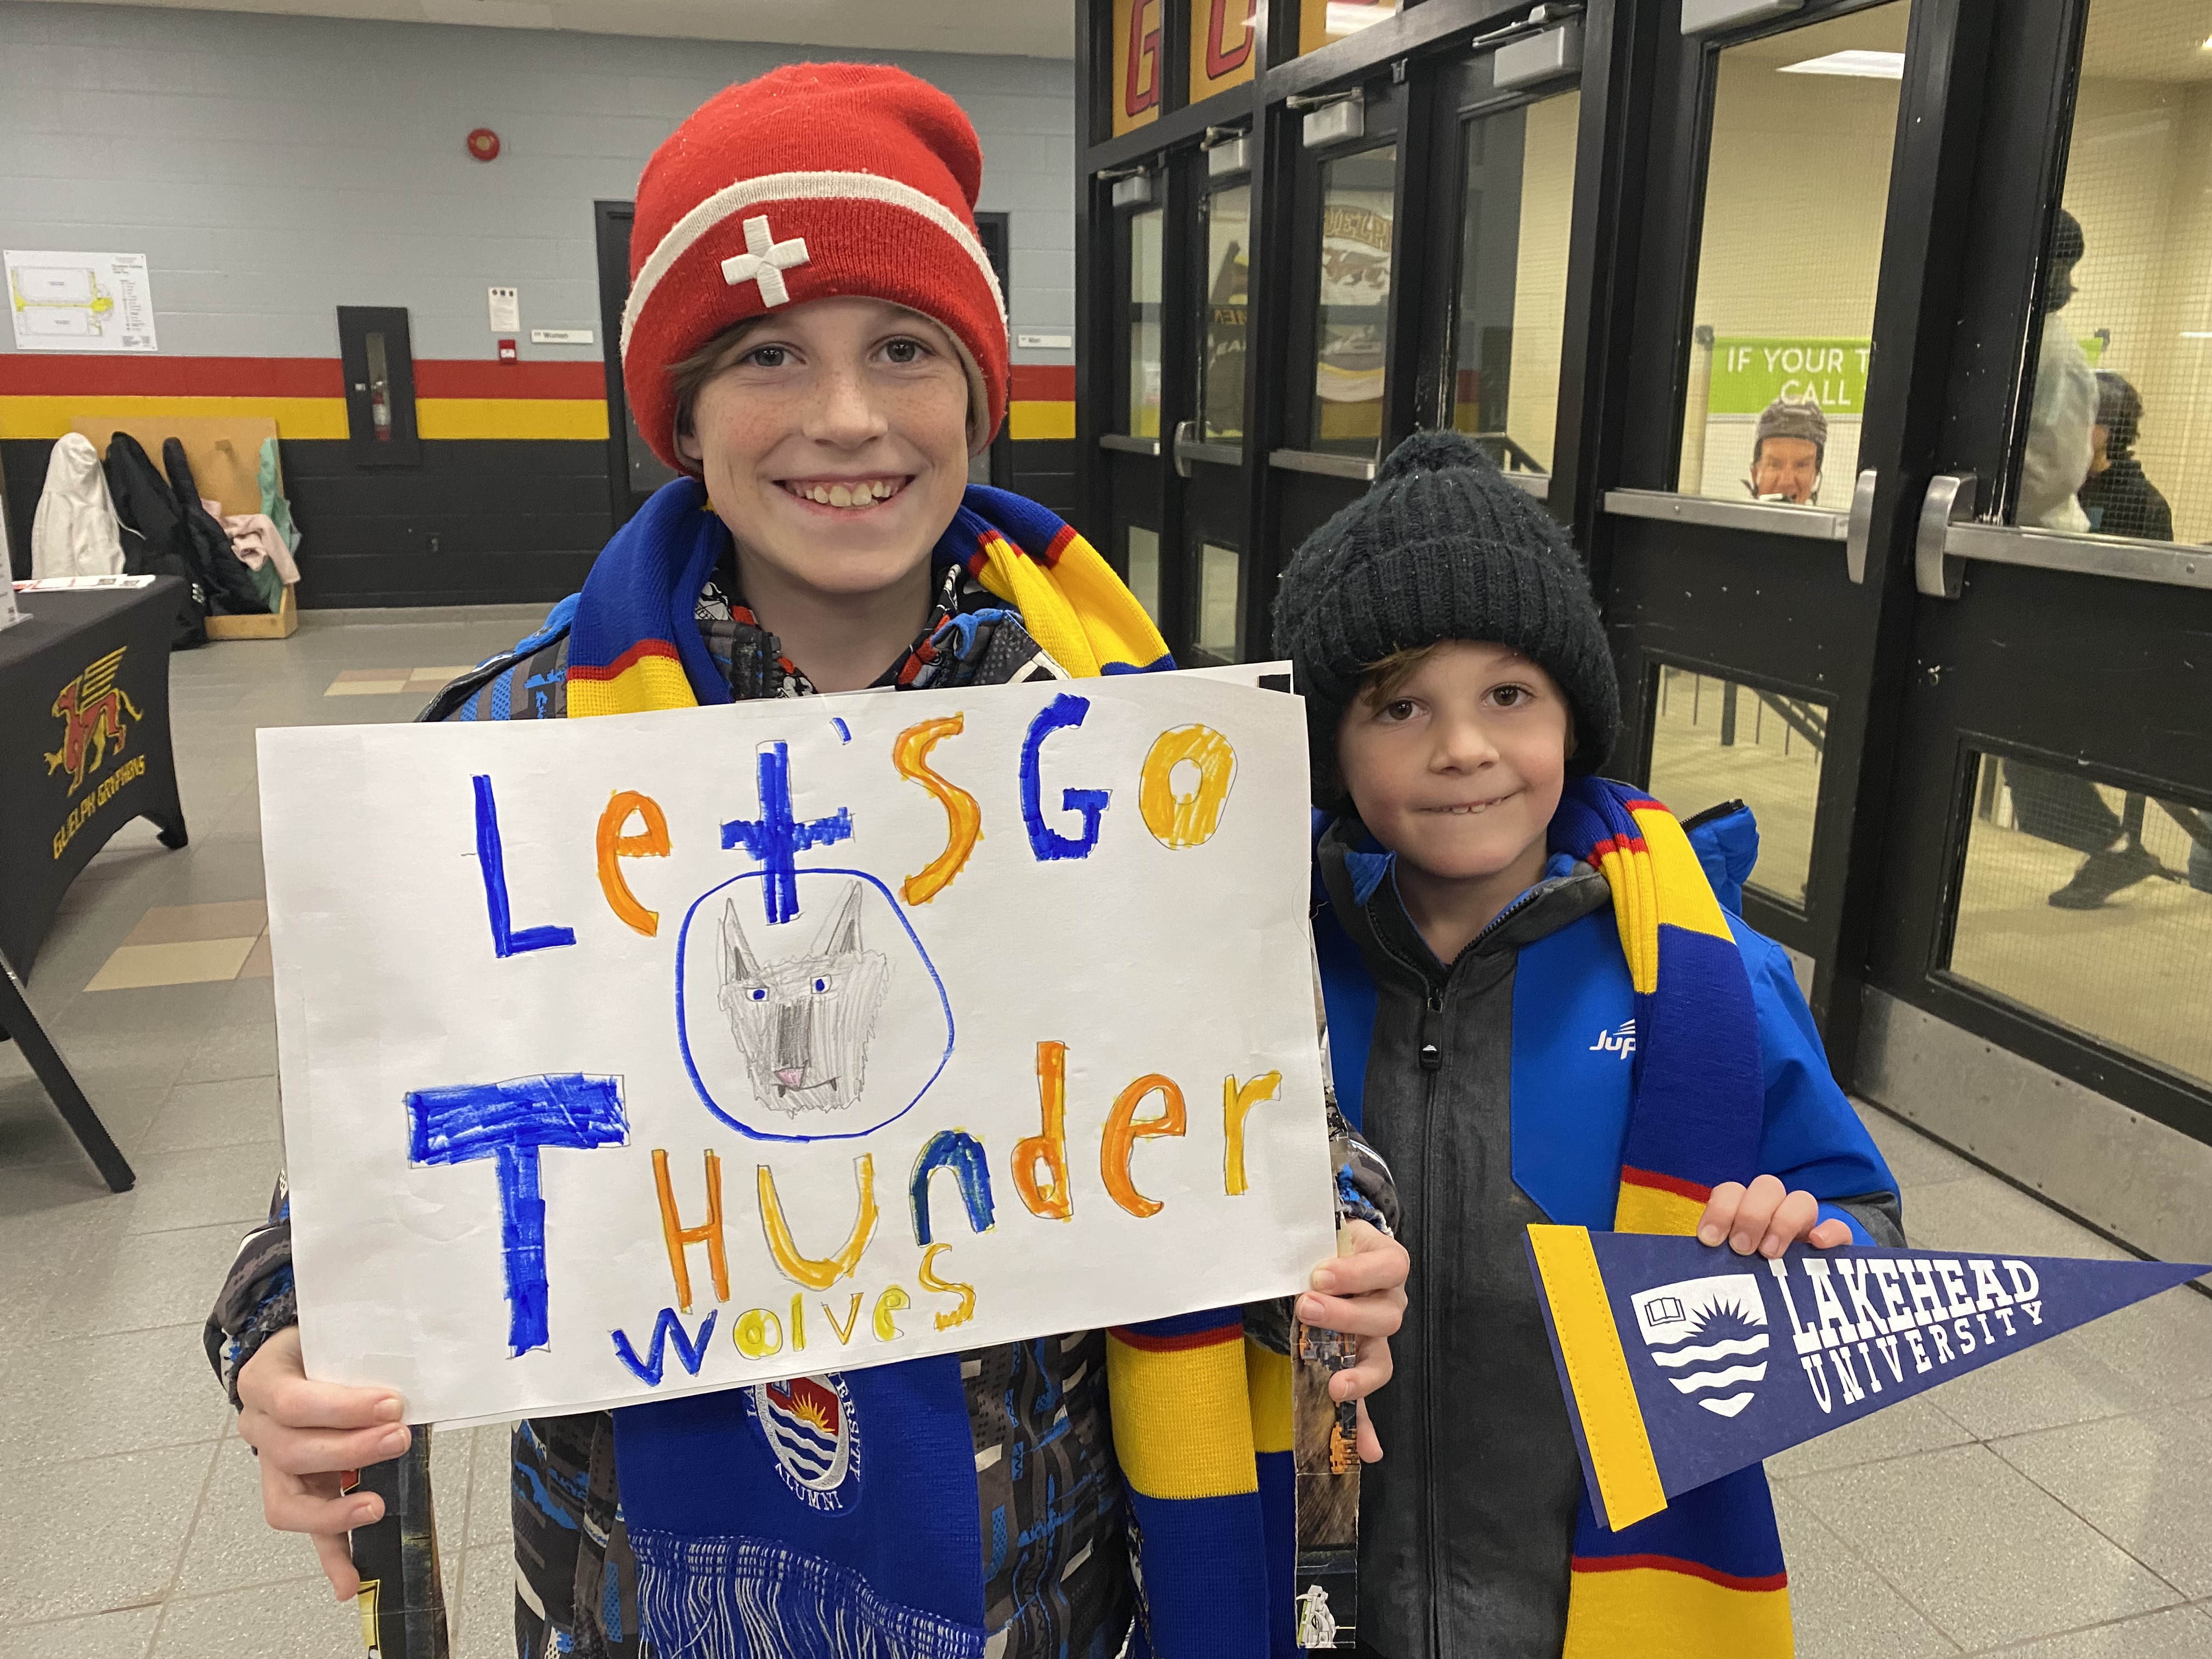 Youngsters Elliot and Cohen Kaesermann wearing Thunderwolves gear and holding a Let's Go Thunderwolves sign